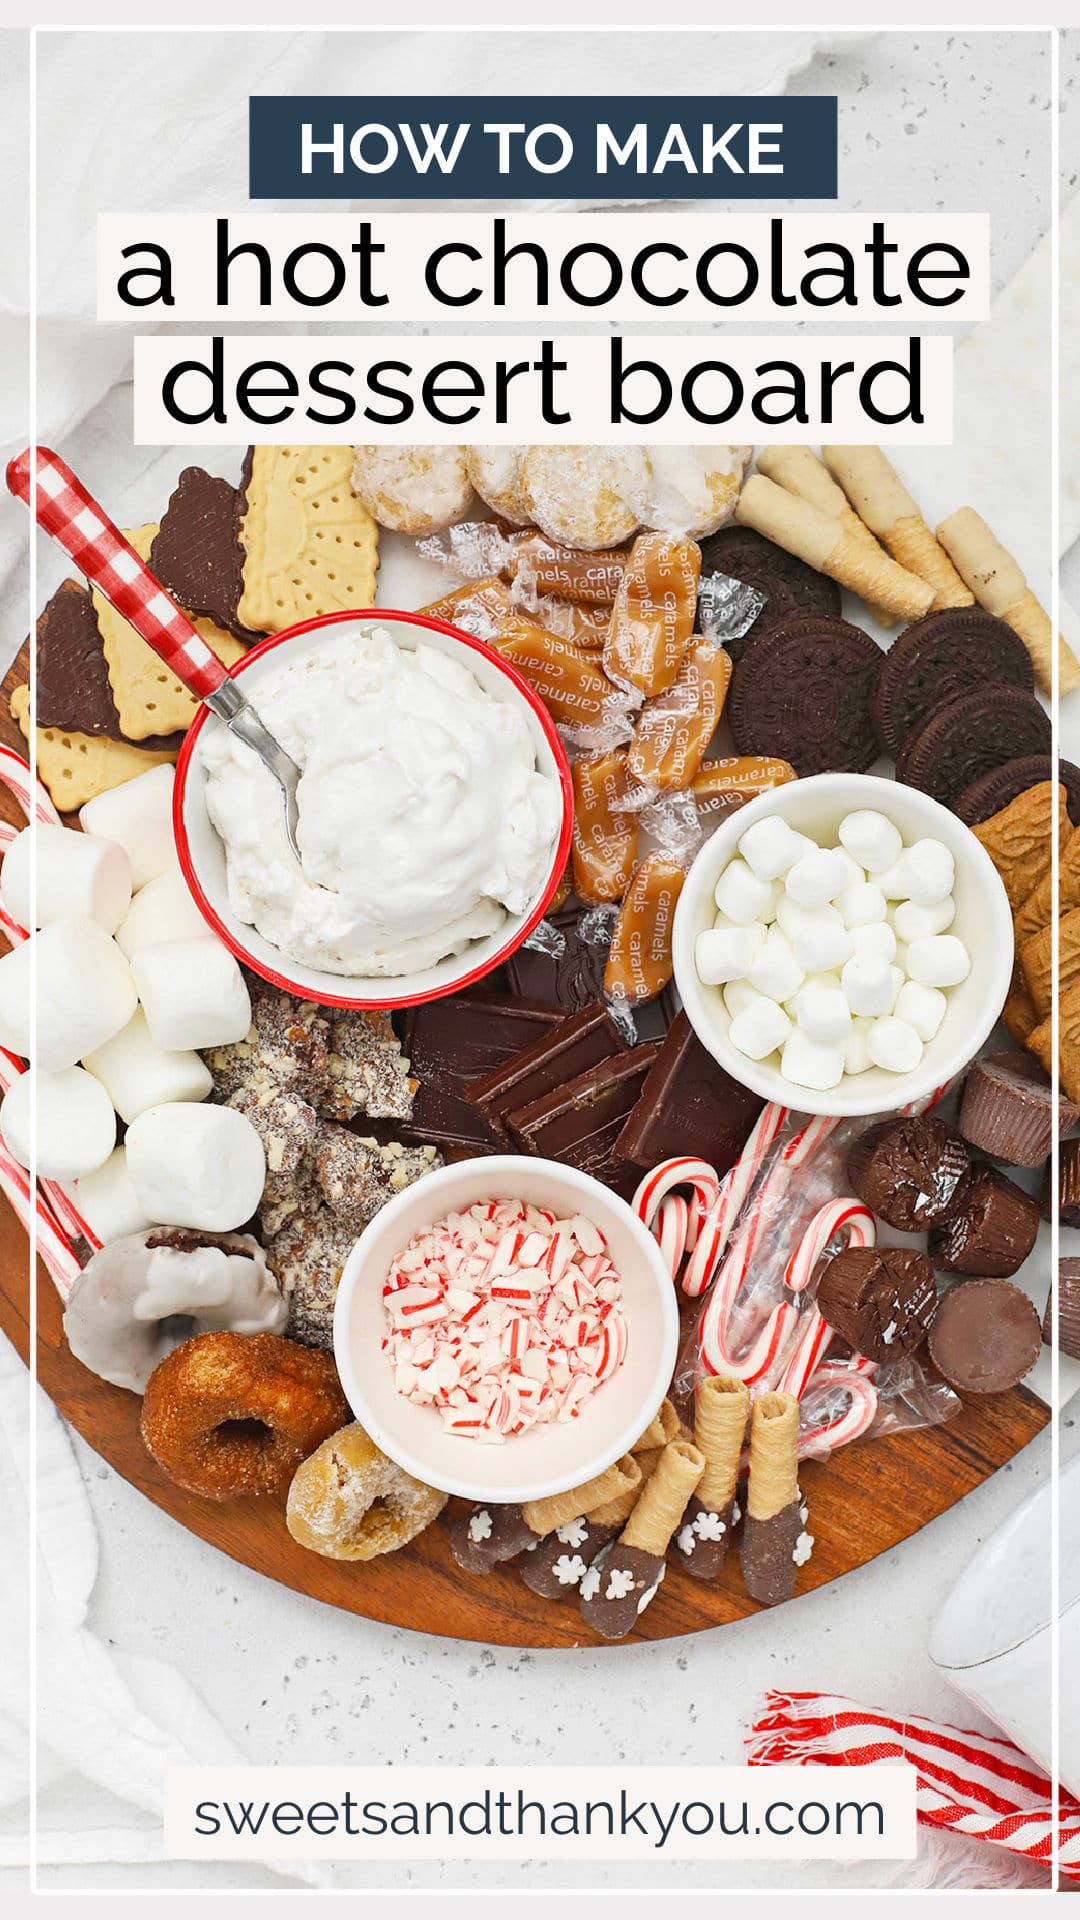 How To Make a Gluten-Free Hot Chocolate Board - Build a gluten-free hot chocolate "charcuterie" board with fun hot chocolate toppings, mix-ins & more! // Hot Chocolate Toppings // Vegan Hot Chocolate // Gluten-Free Charcuterie Board // Gluten-Free Hot Chocolate // Gluten-Free Snack Board // Gluten-free party ideas // Gluten-Free Hot Chocolate Bar // Gluten-Free Holiday Party // Chocolate Charcuterie // Dessert Charcuterie Board